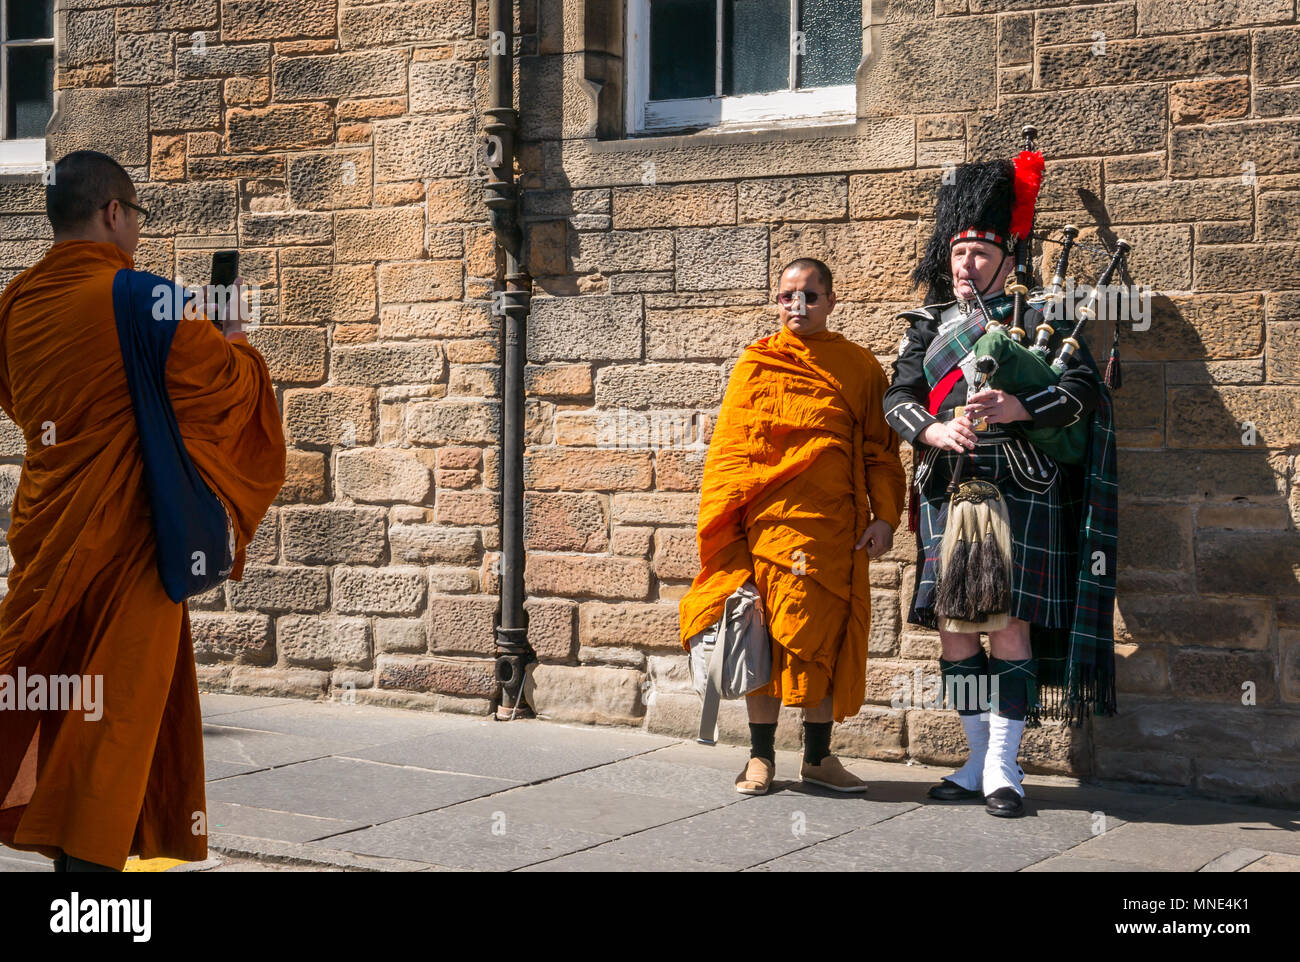 Royal Mile, Edinburgh, 16th May 2018. Tourists enjoying the sunshine on the Royal Mile, Edinburgh, Scotland, United Kingdom. Tourists throng the Royal Mile, including a group of Buddhist monks dressed in bright orange robes. A buddhist monk is taking a photo of a Buddhist monk standing next to a Scottish bagpipe player dressed in a kilt Stock Photo